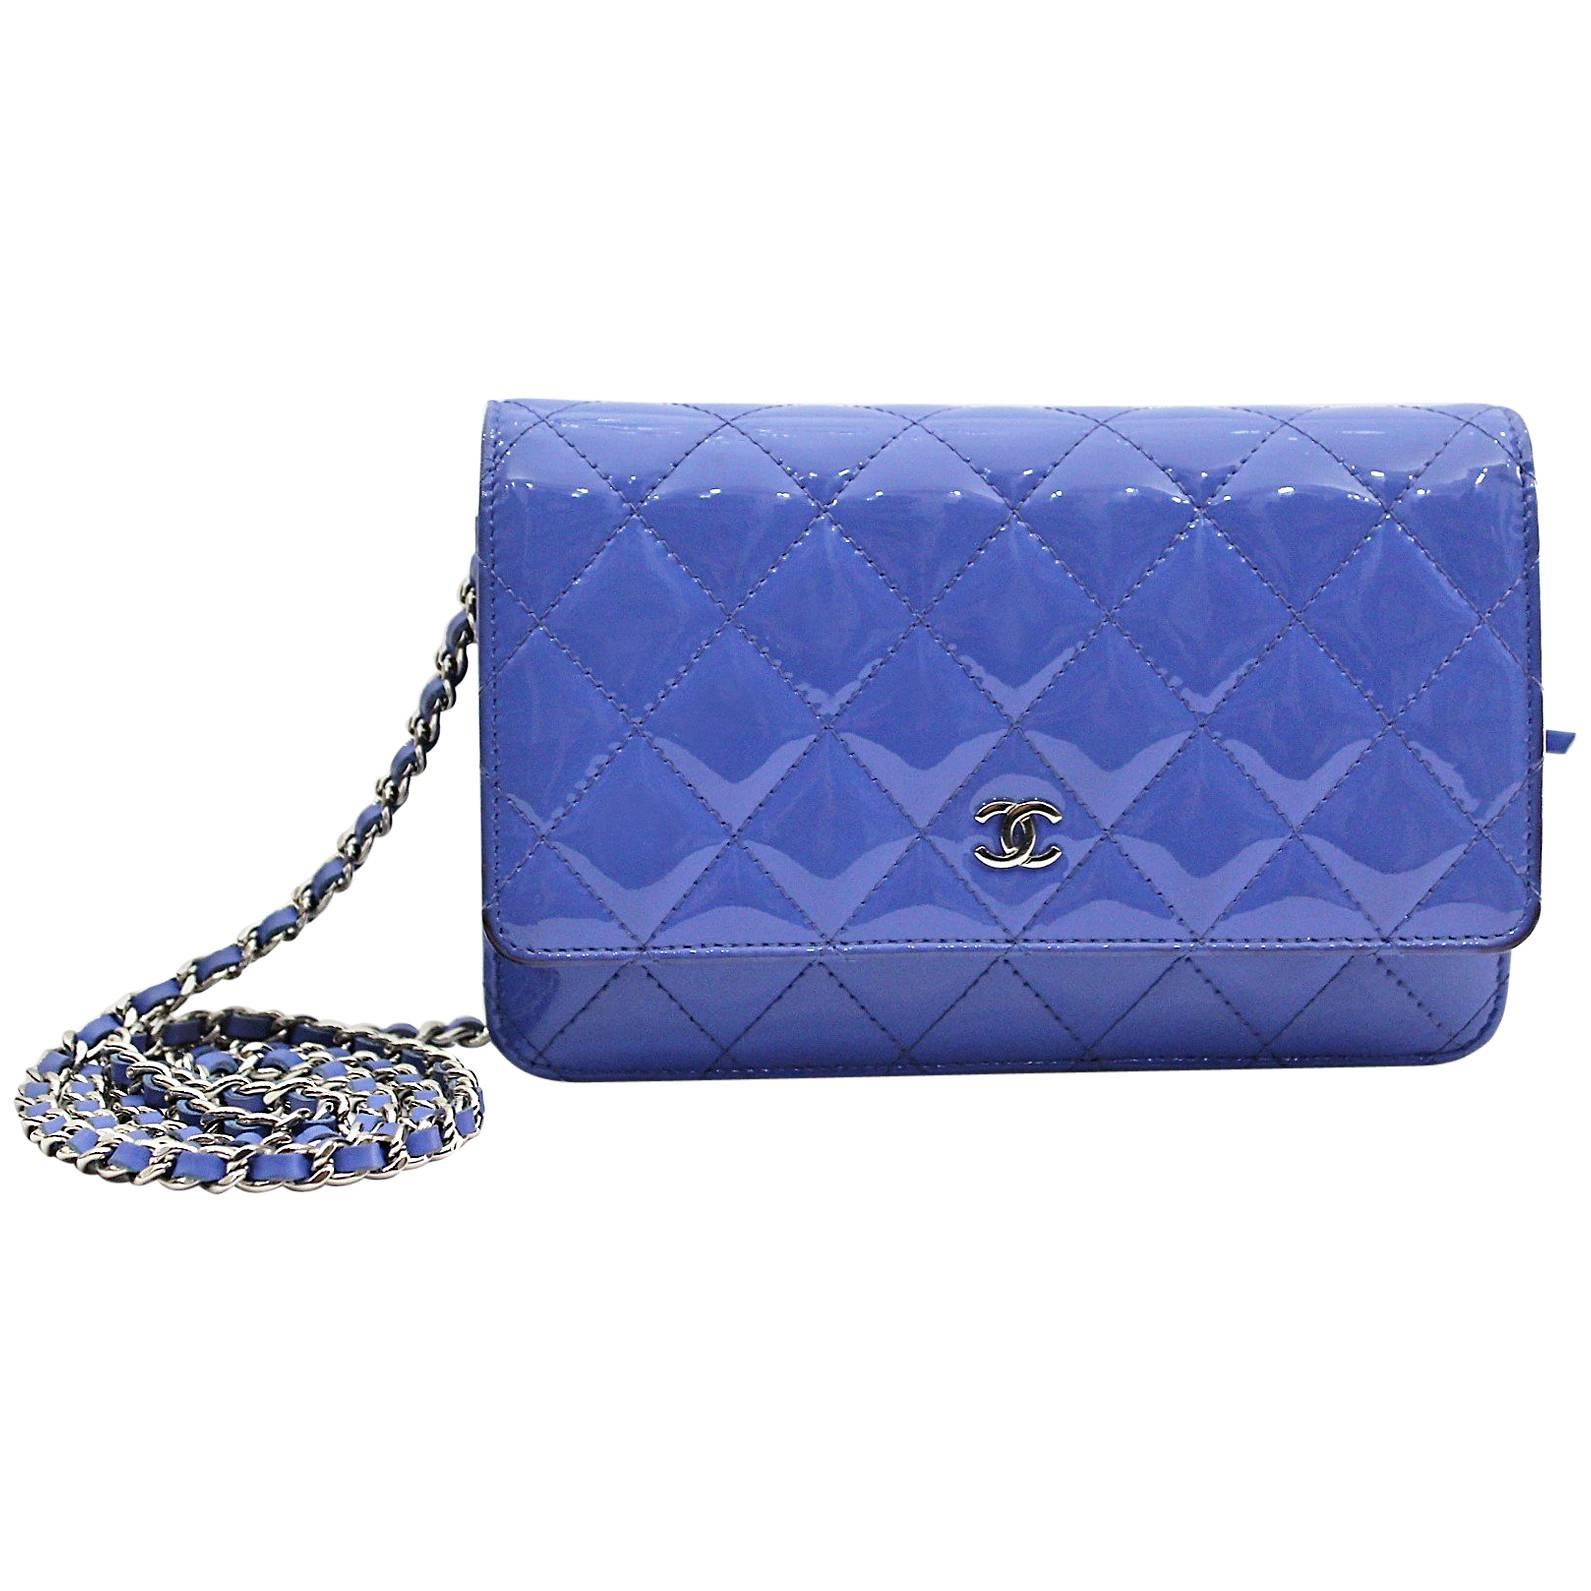 Chanel Lilac Quilted Patent Leather Wallet on Chain Clutch Bag